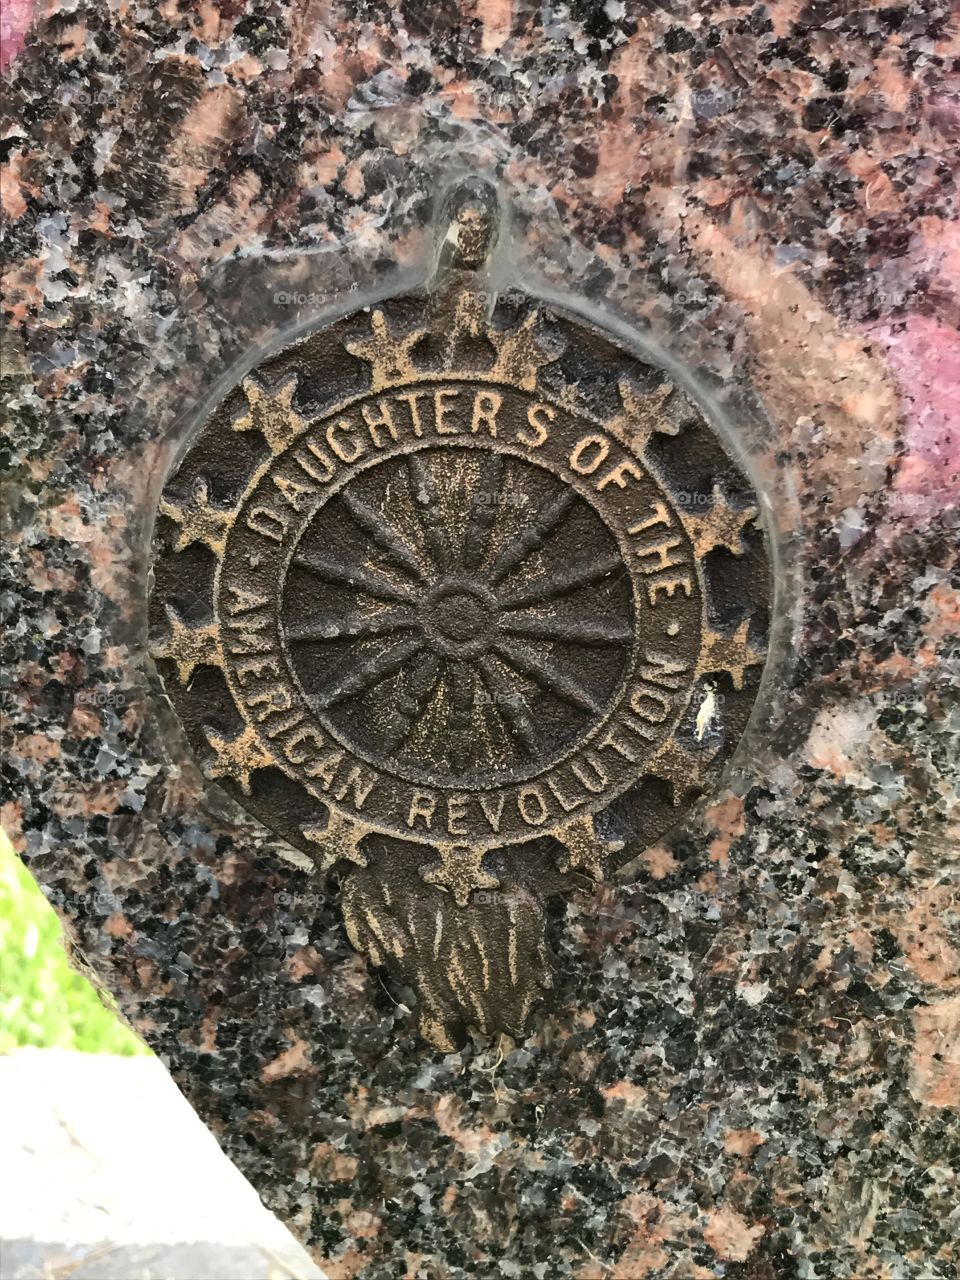 Daughters of the American revolution marker glued to a cemetery headstone